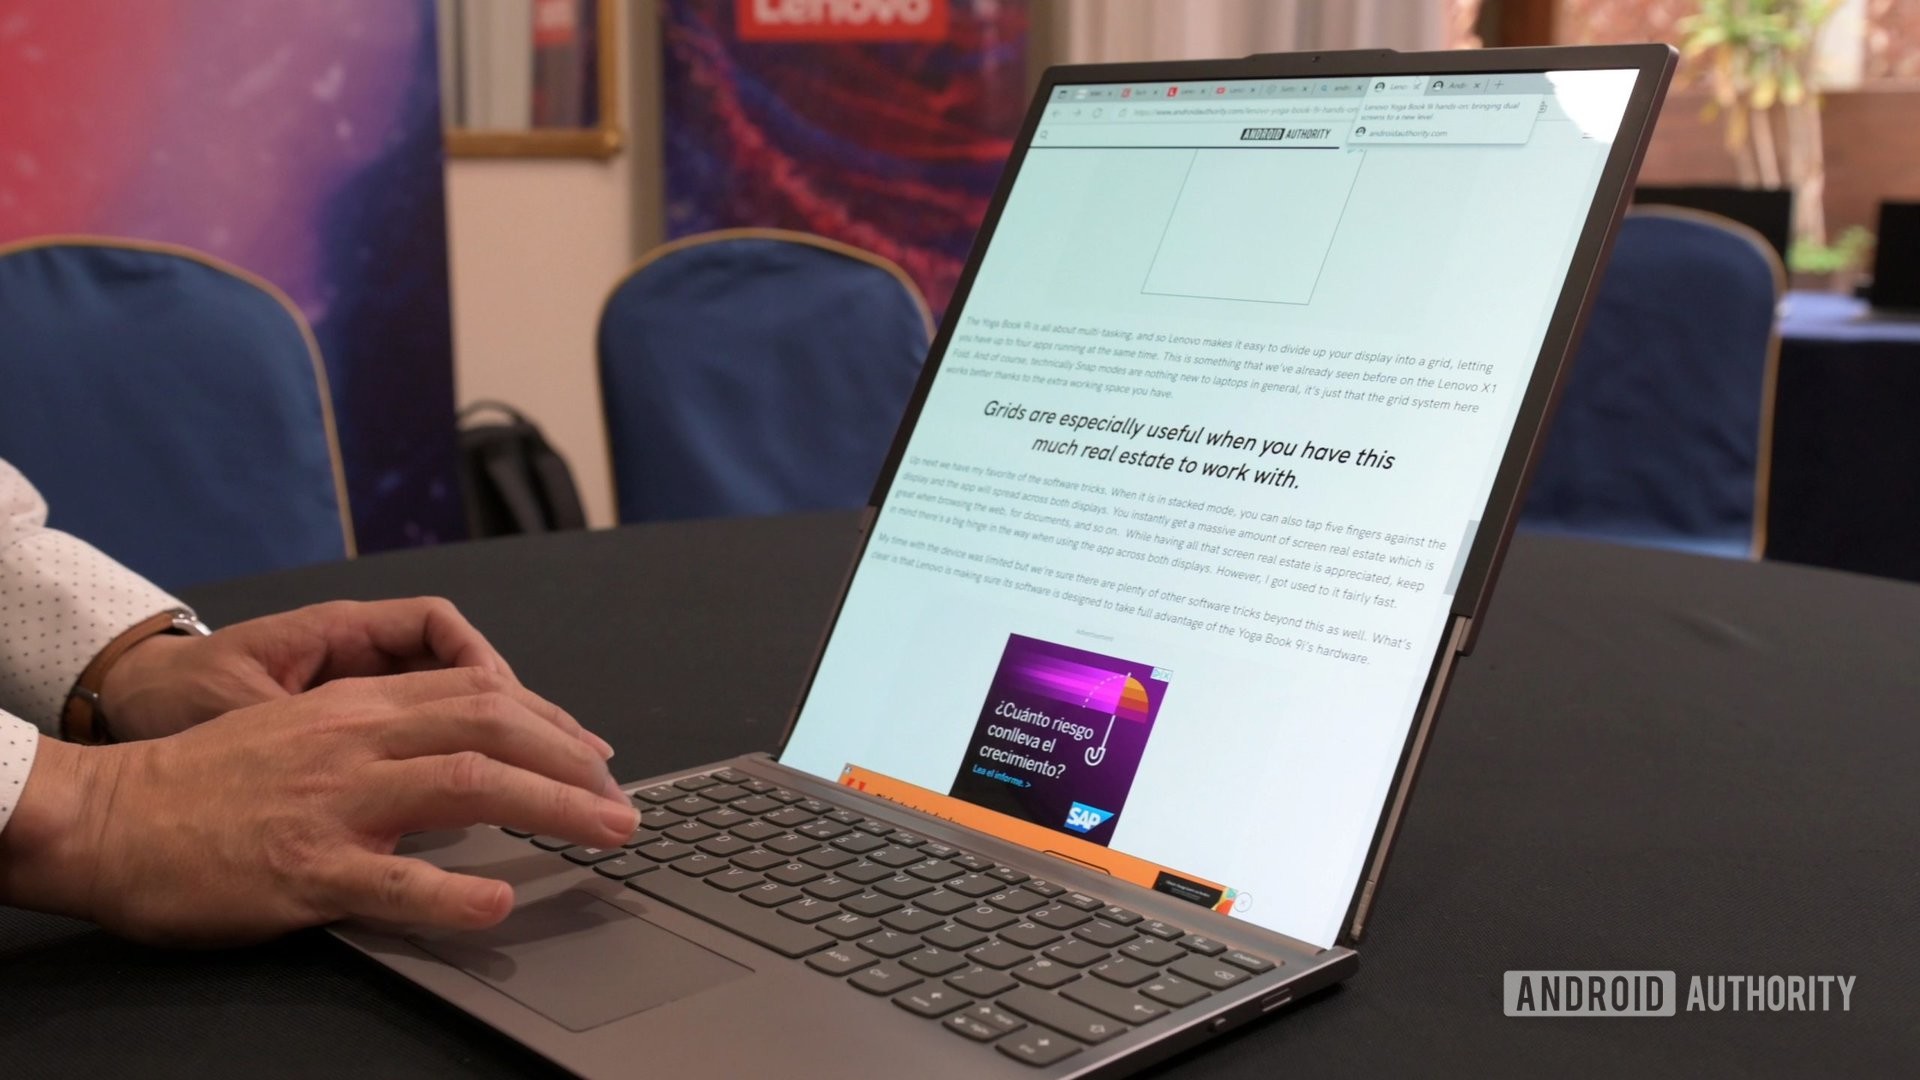 Lenovo rollable screen laptop hands-on: Expandable display in action